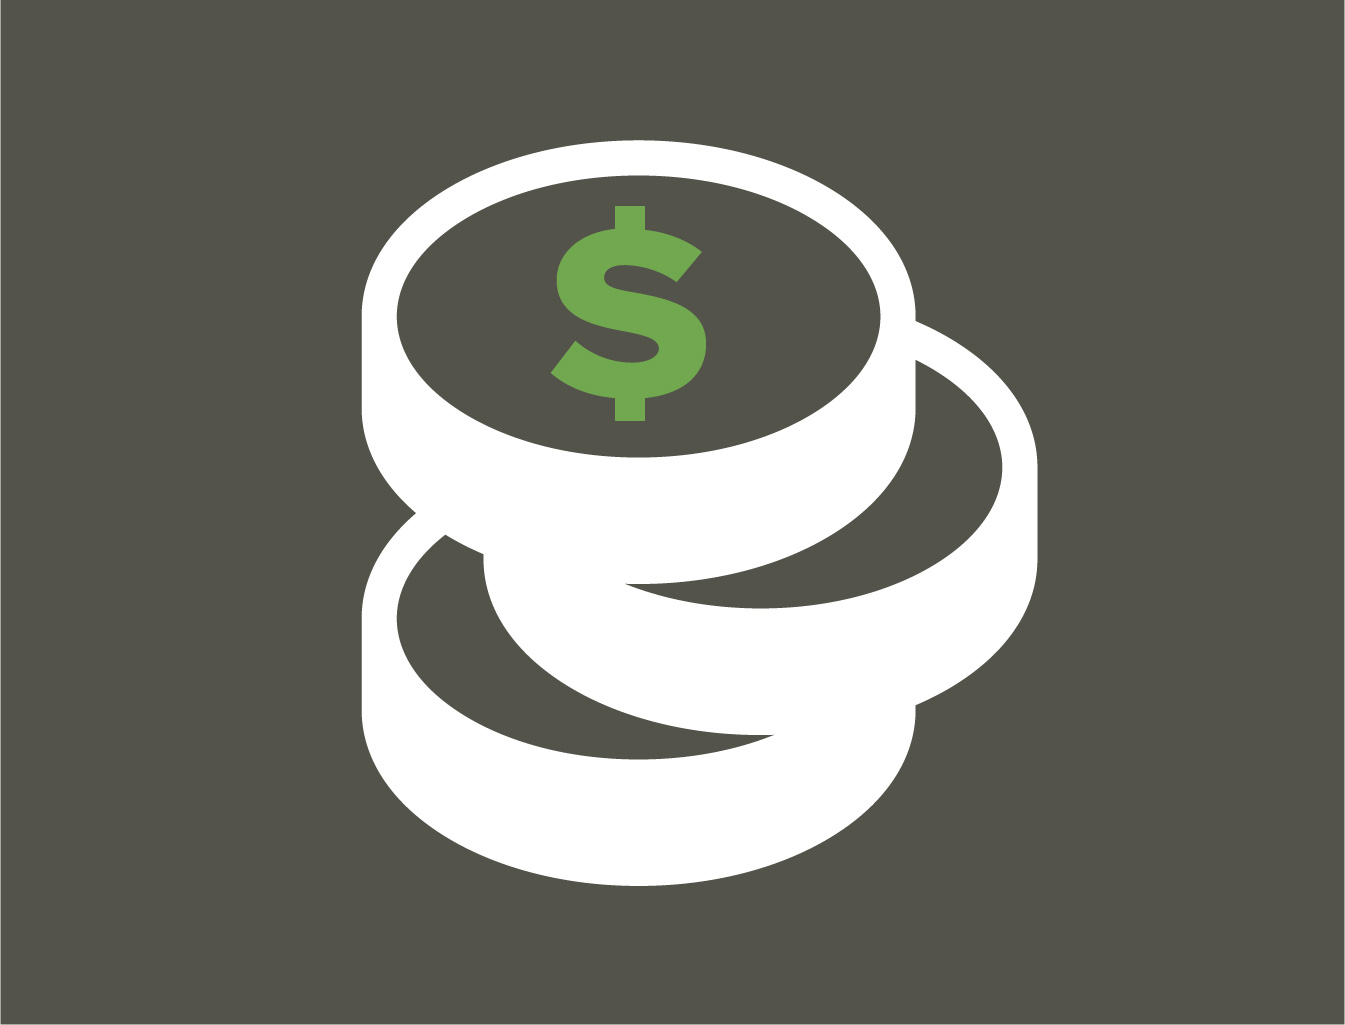 icon of stacked coins with a dollar sign in green